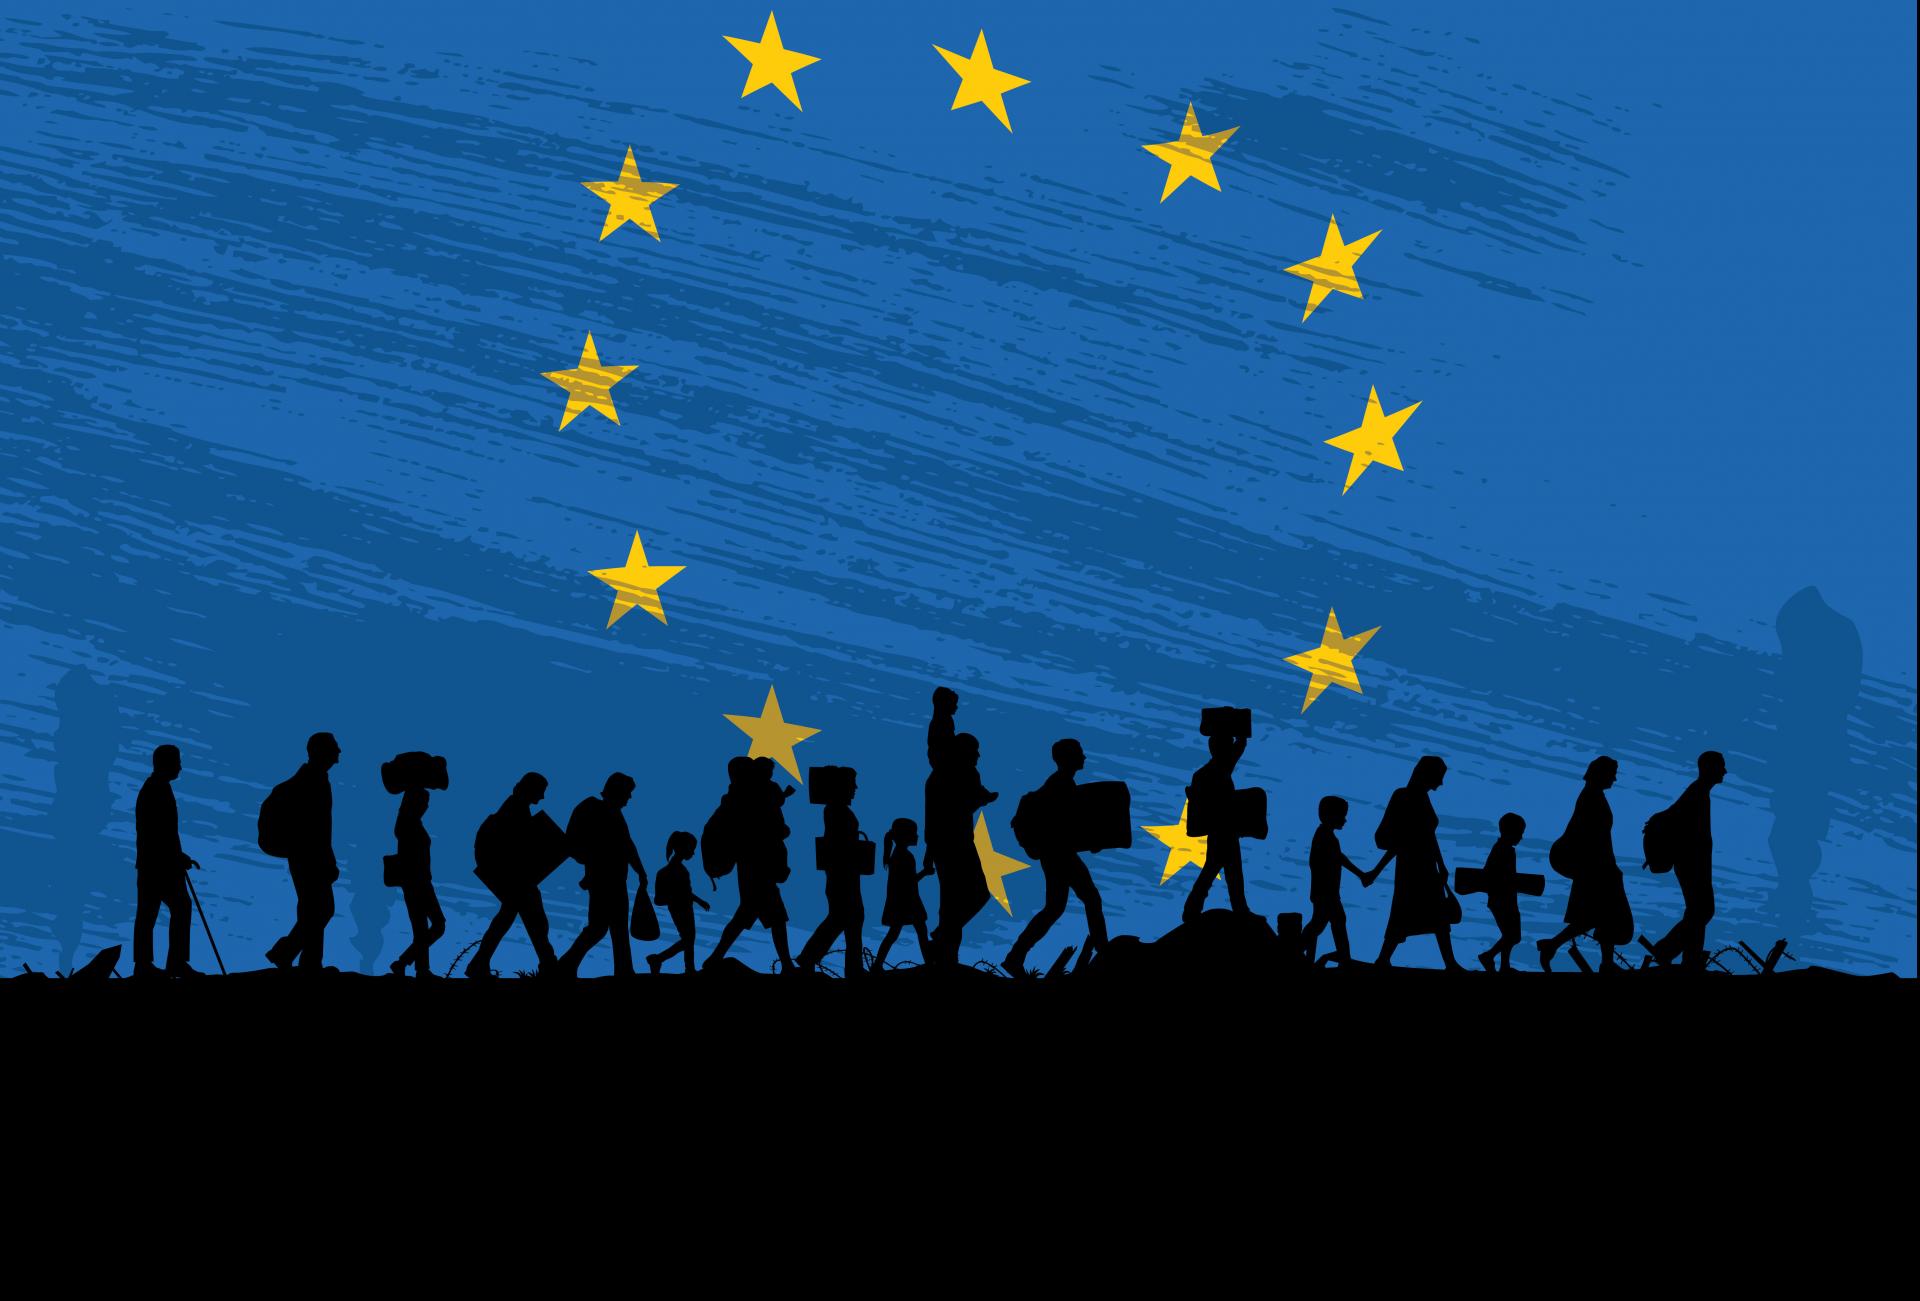 Silhouette of a group of refugees walking with flag of Europe as a background